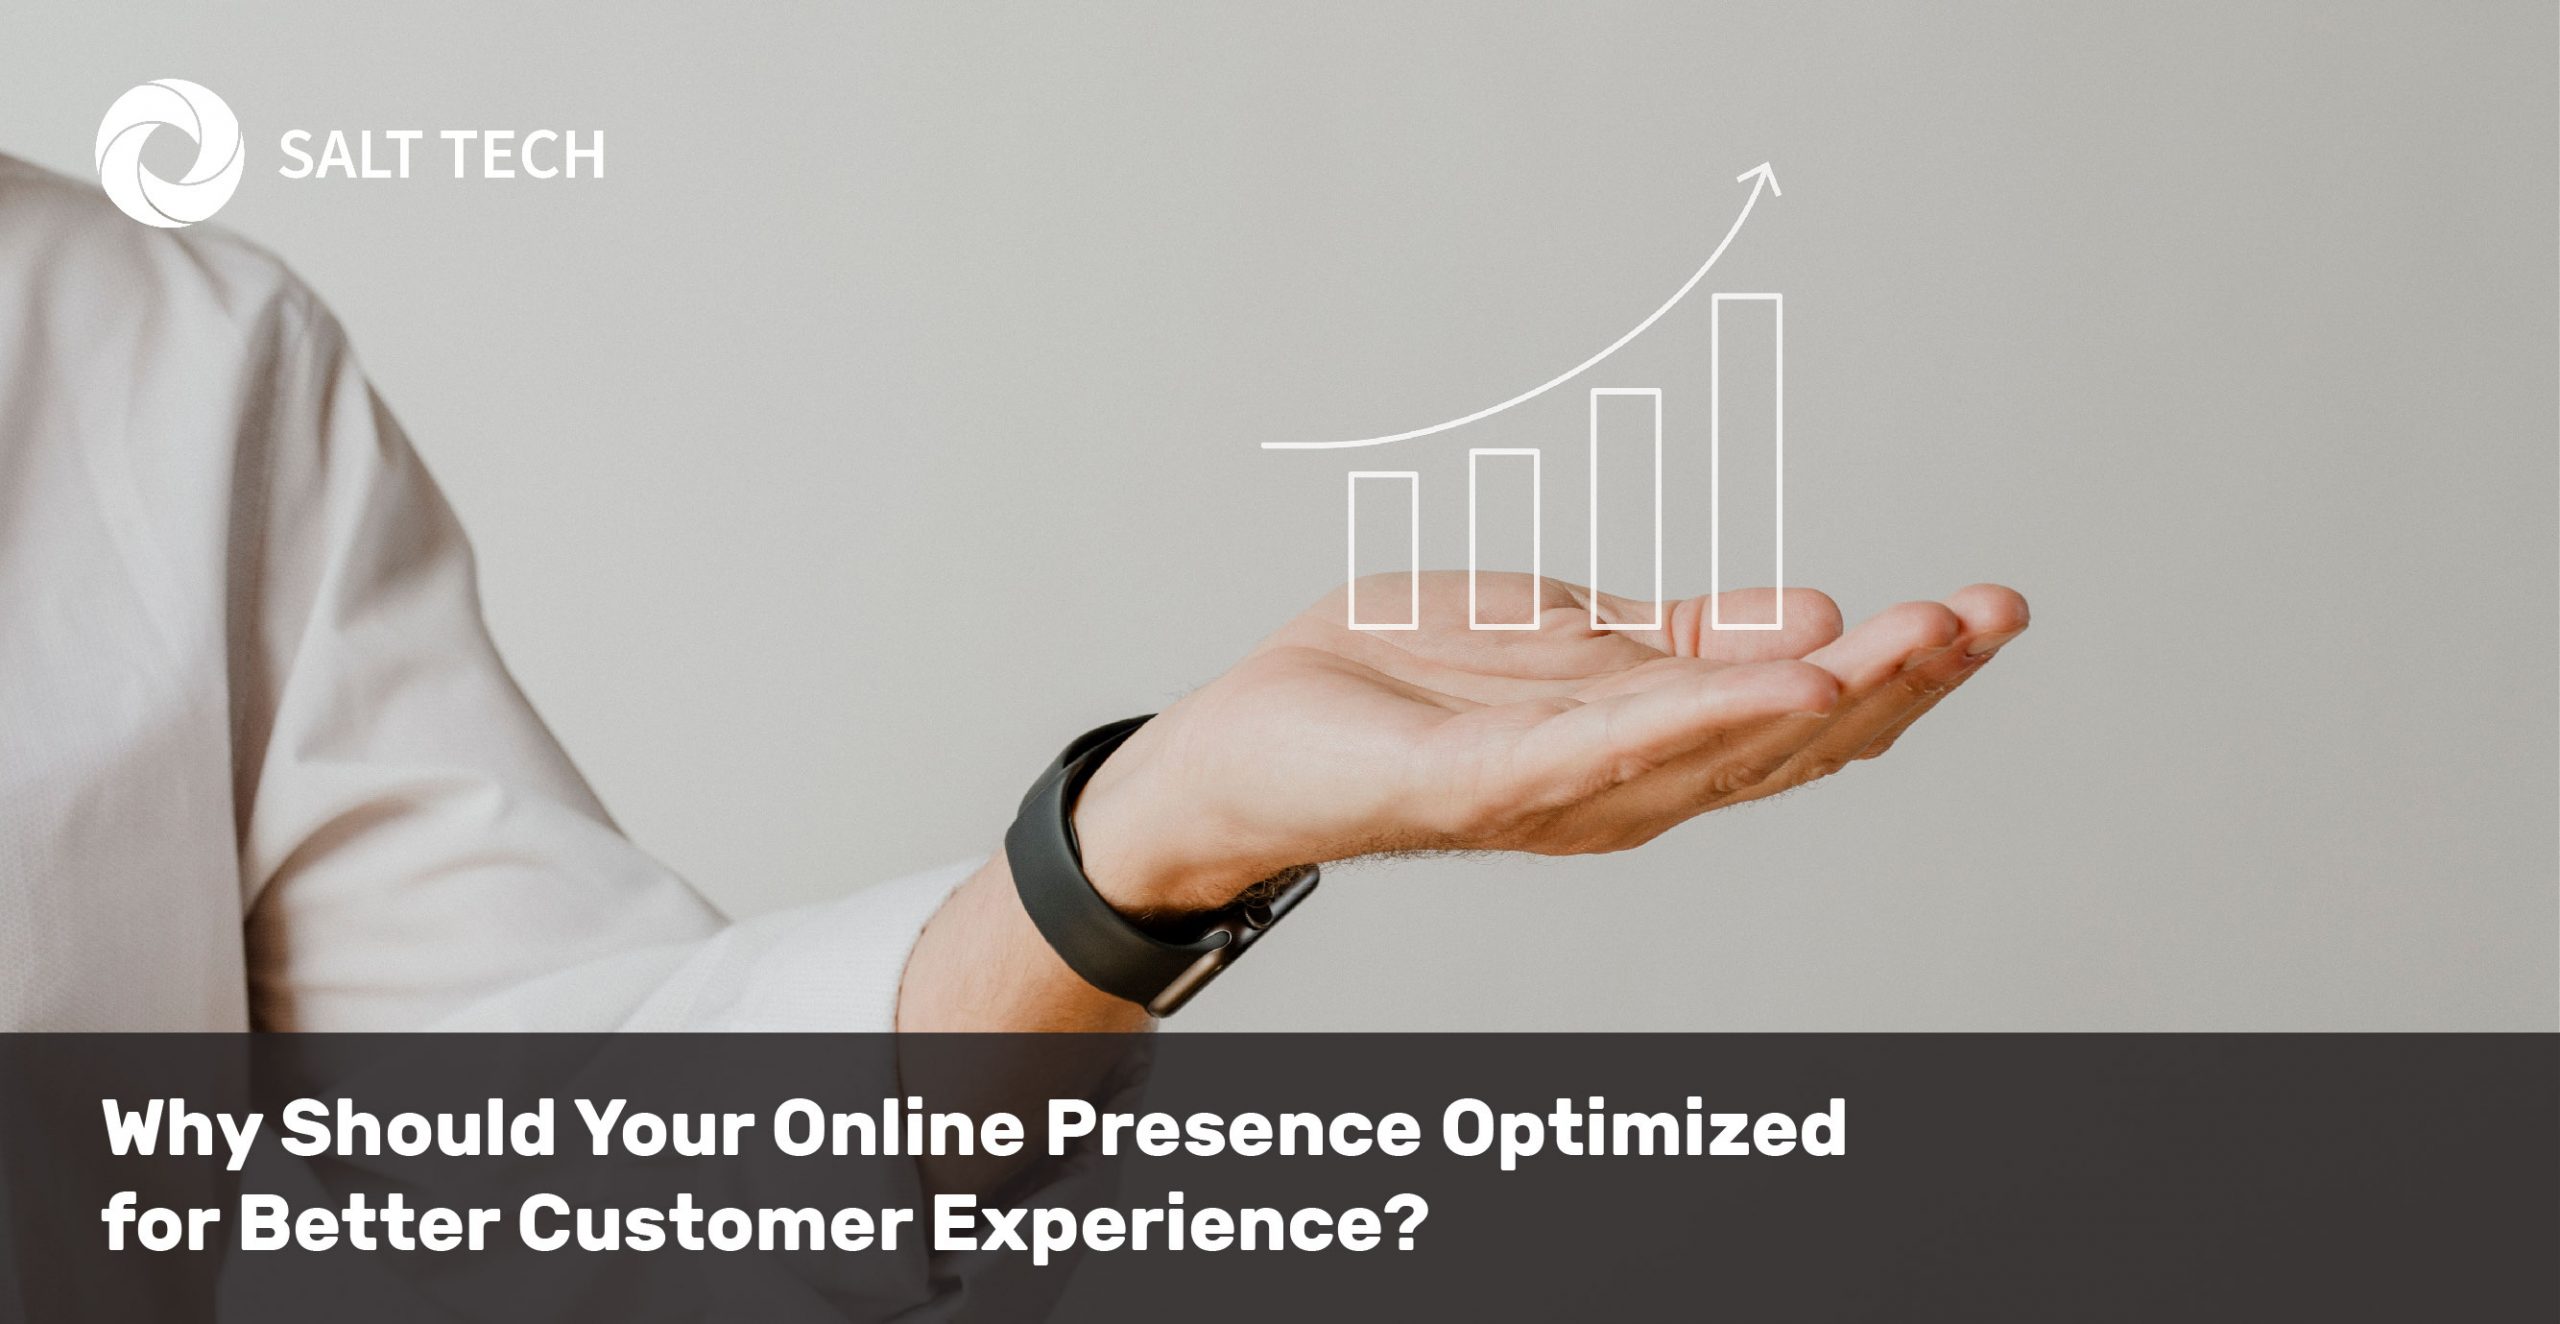 SALT TECH - Blog - Why Should Your Online Presence Optimized for Better Customer Experience